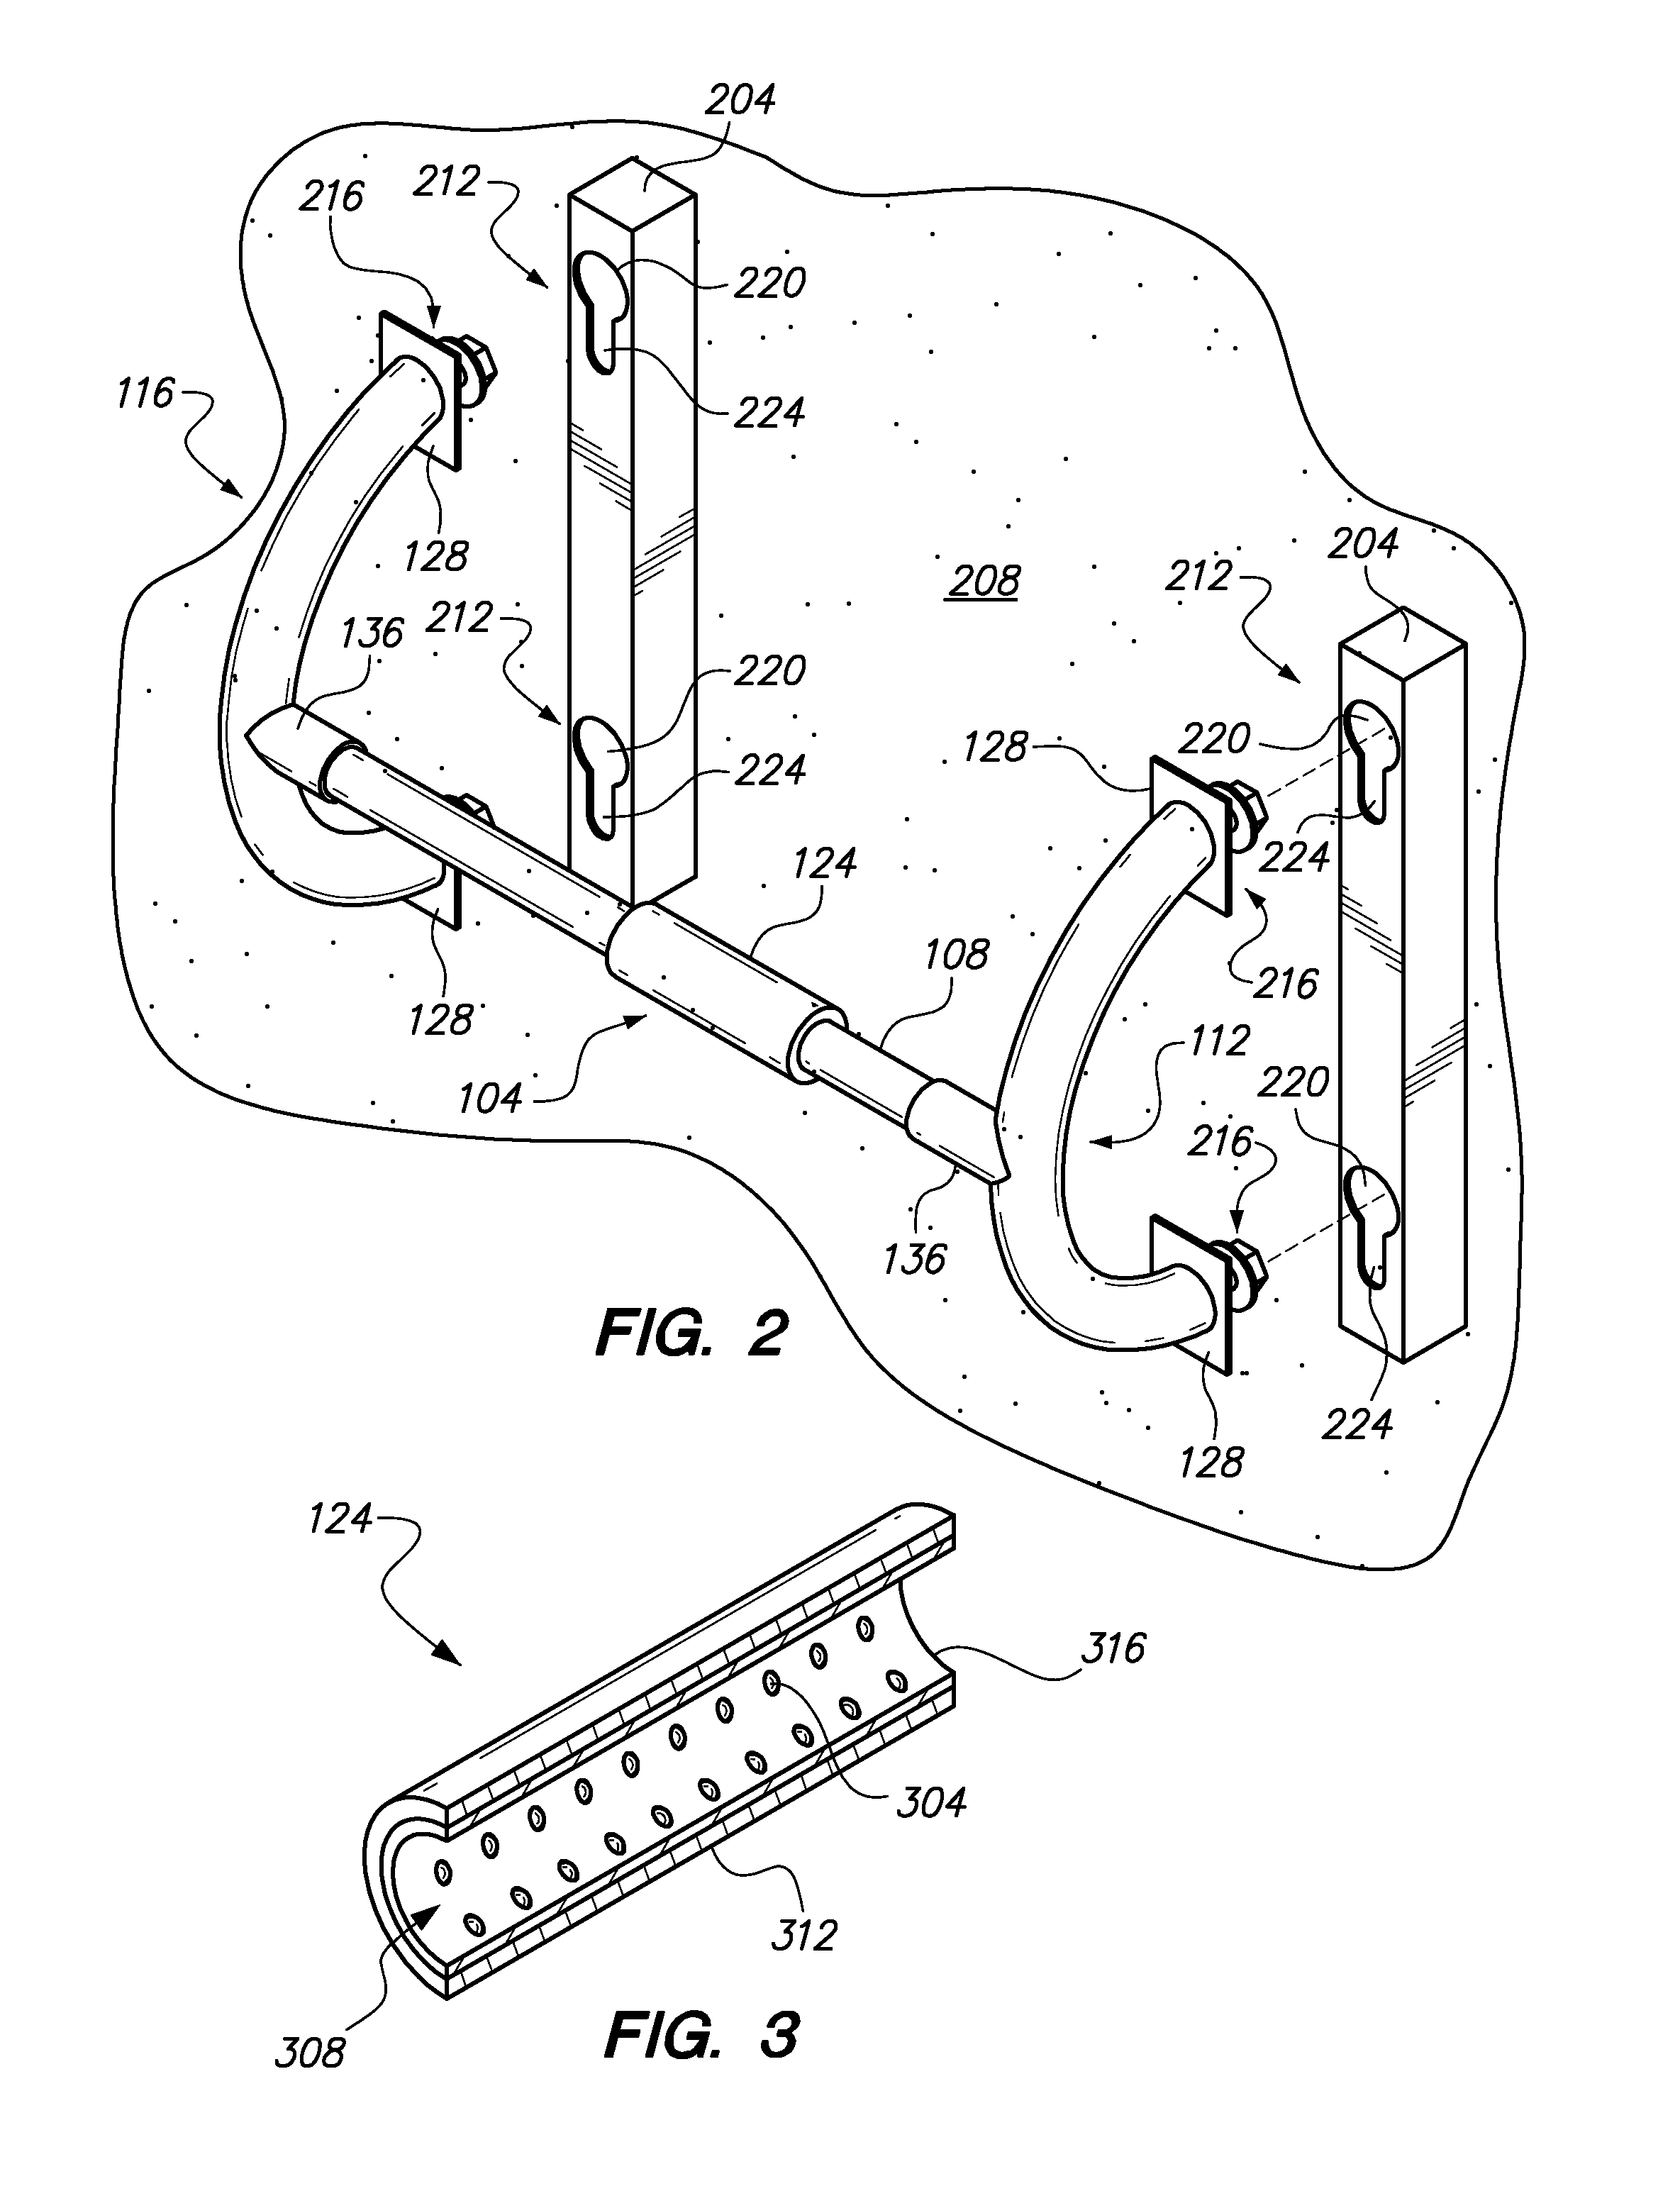 Upper body workout apparatuses and assembly thereof